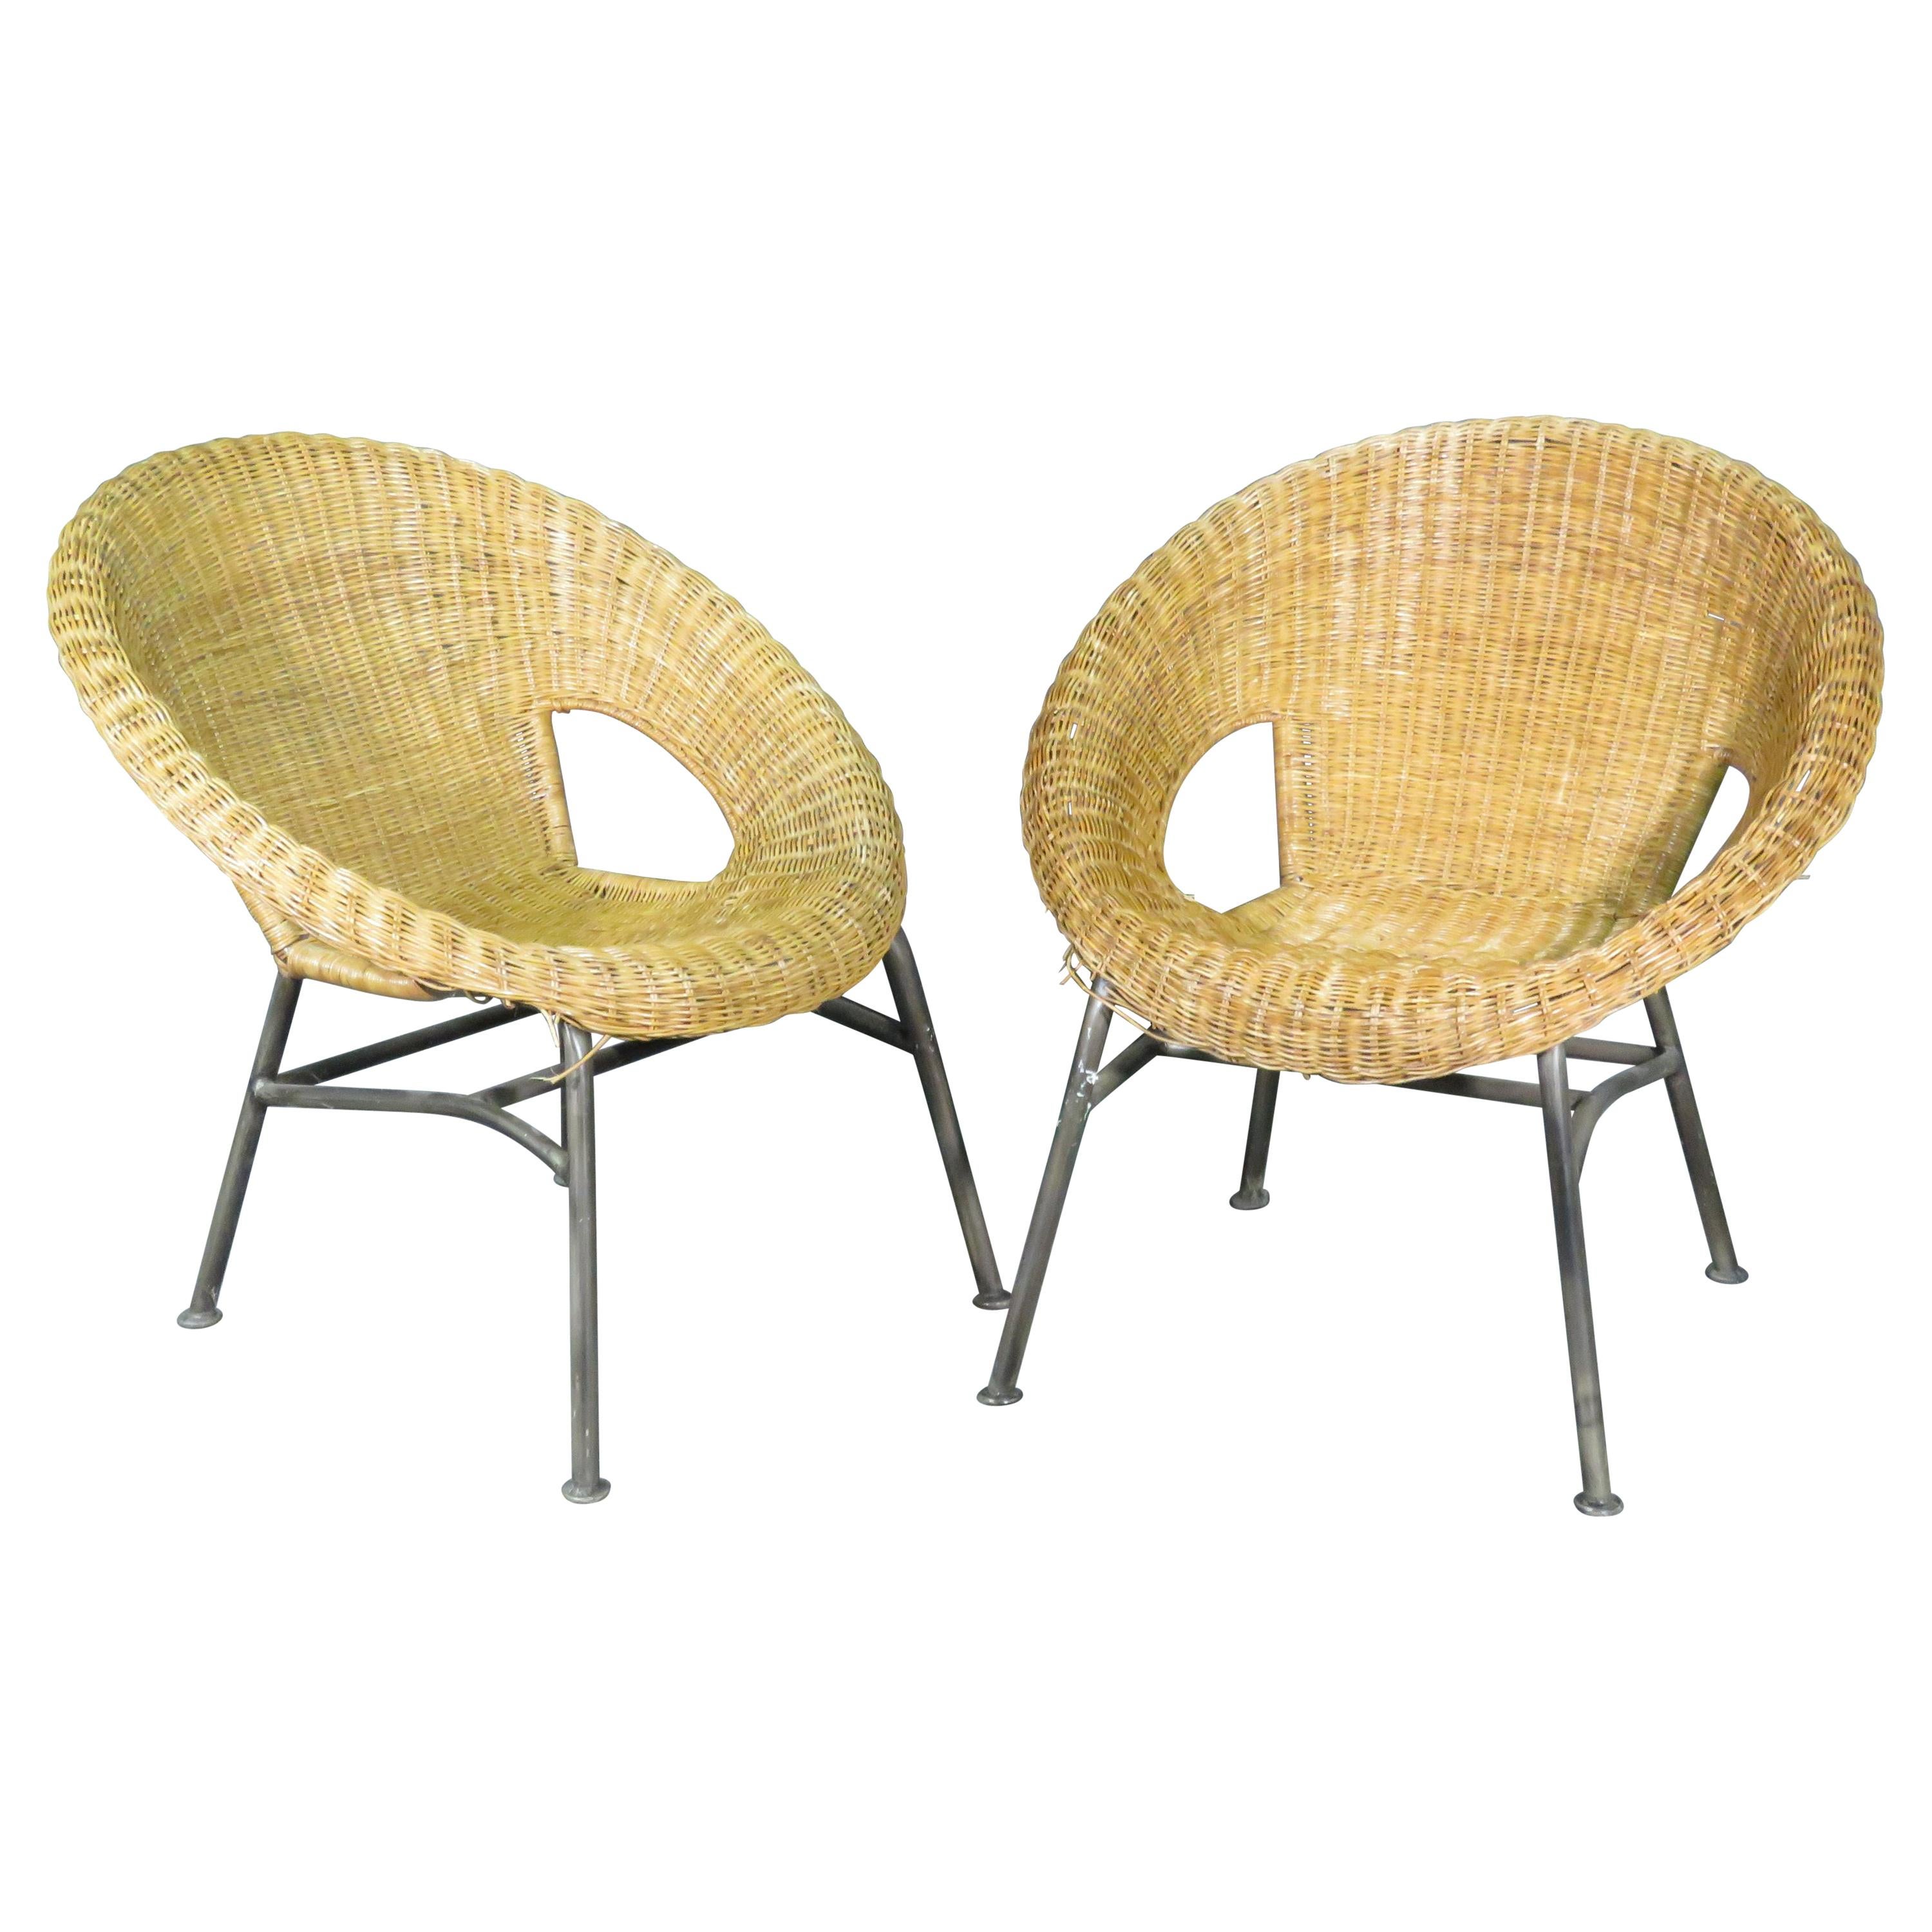 Pair of Vintage Wicker Basket Chairs For Sale